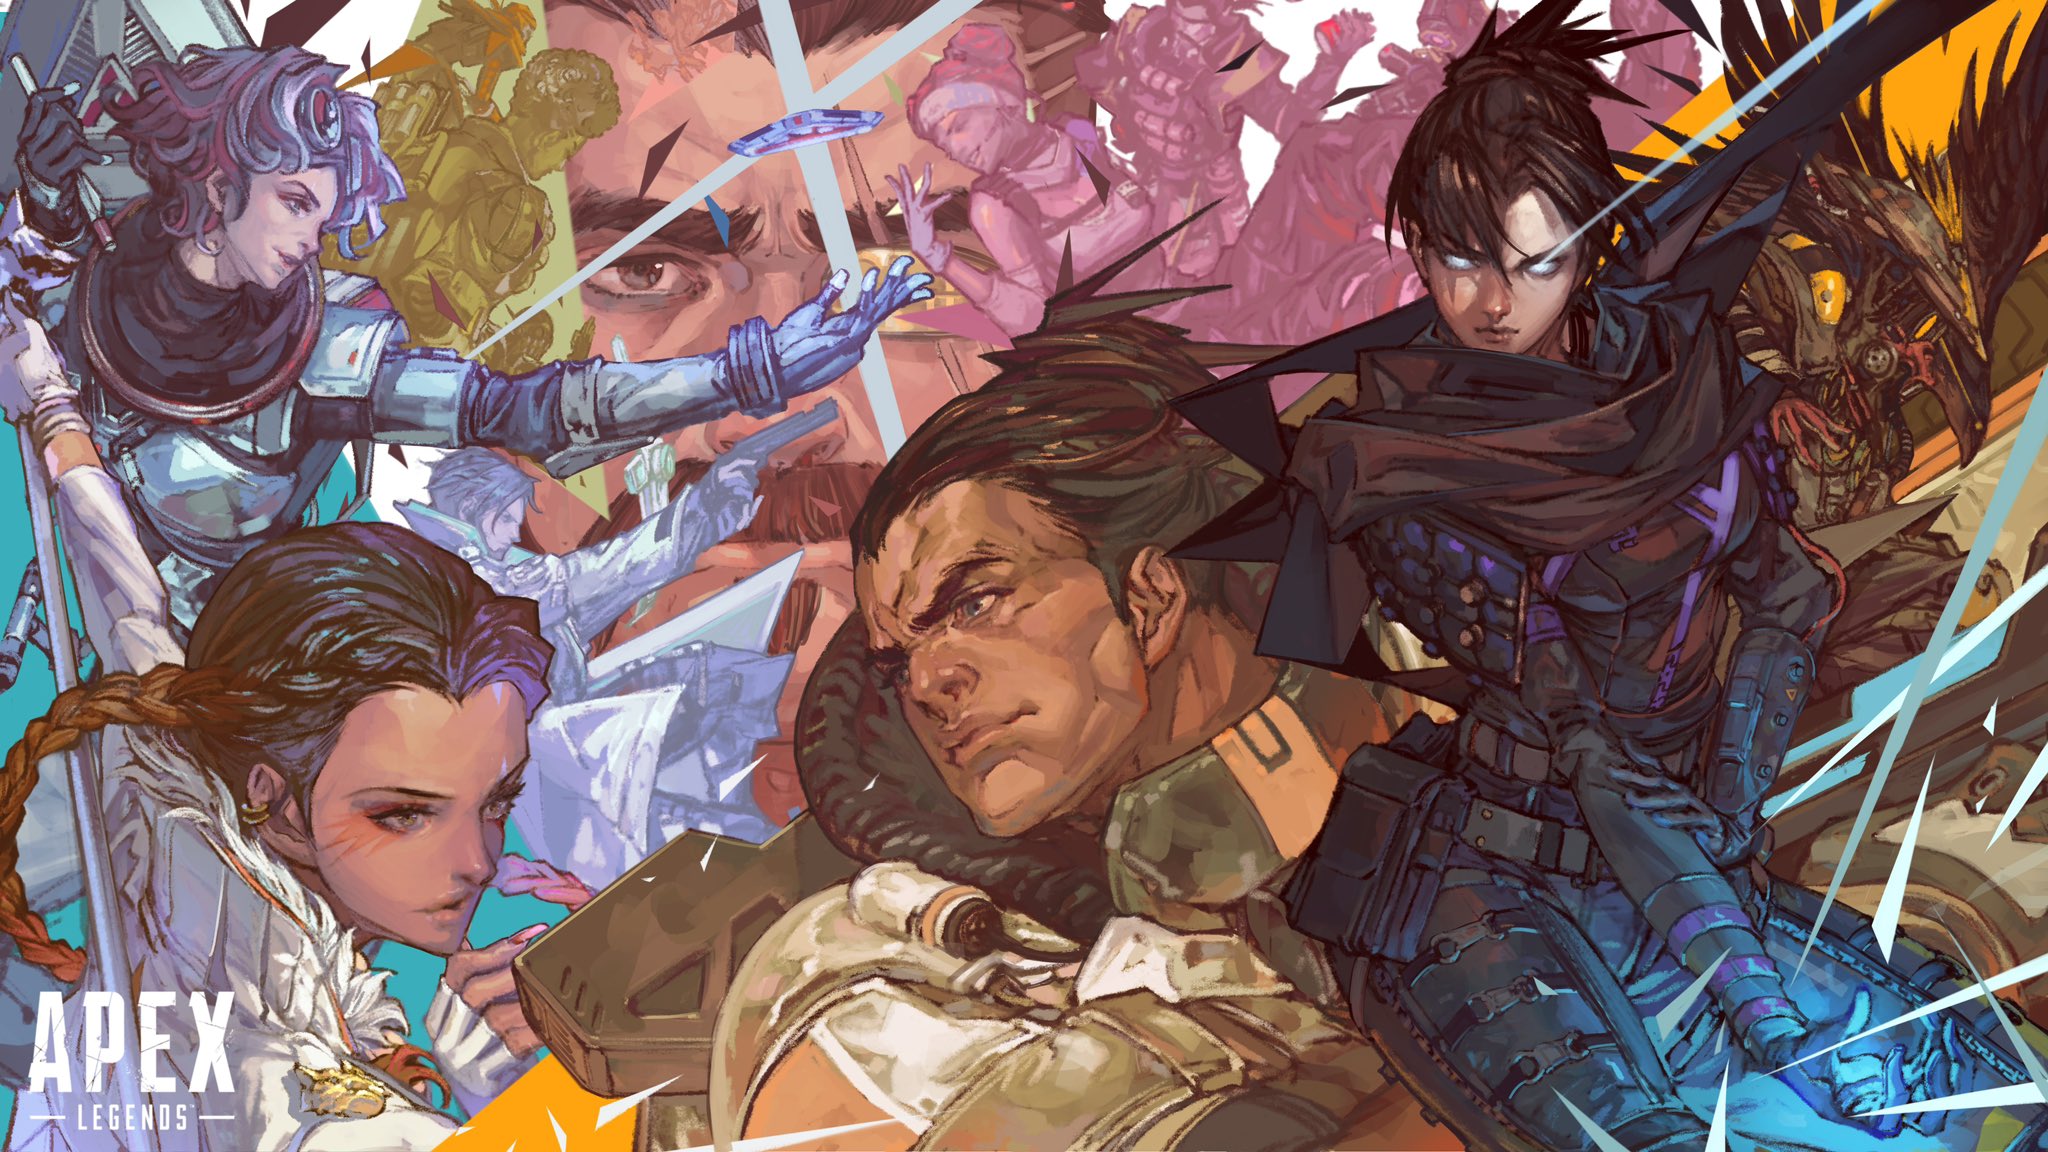 General 2048x1152 Apex Legends Loba Andrade Horizon (Apex Legends) Wraith (Apex Legends) Fuse (Apex Legends) Bloodhound (Apex Legends) Pathfinder (Apex Legends) video games video game characters Gibraltar (Apex Legends) Crypto (Apex Legends) Lifeline (Apex Legends) Caustic (Apex Legends)